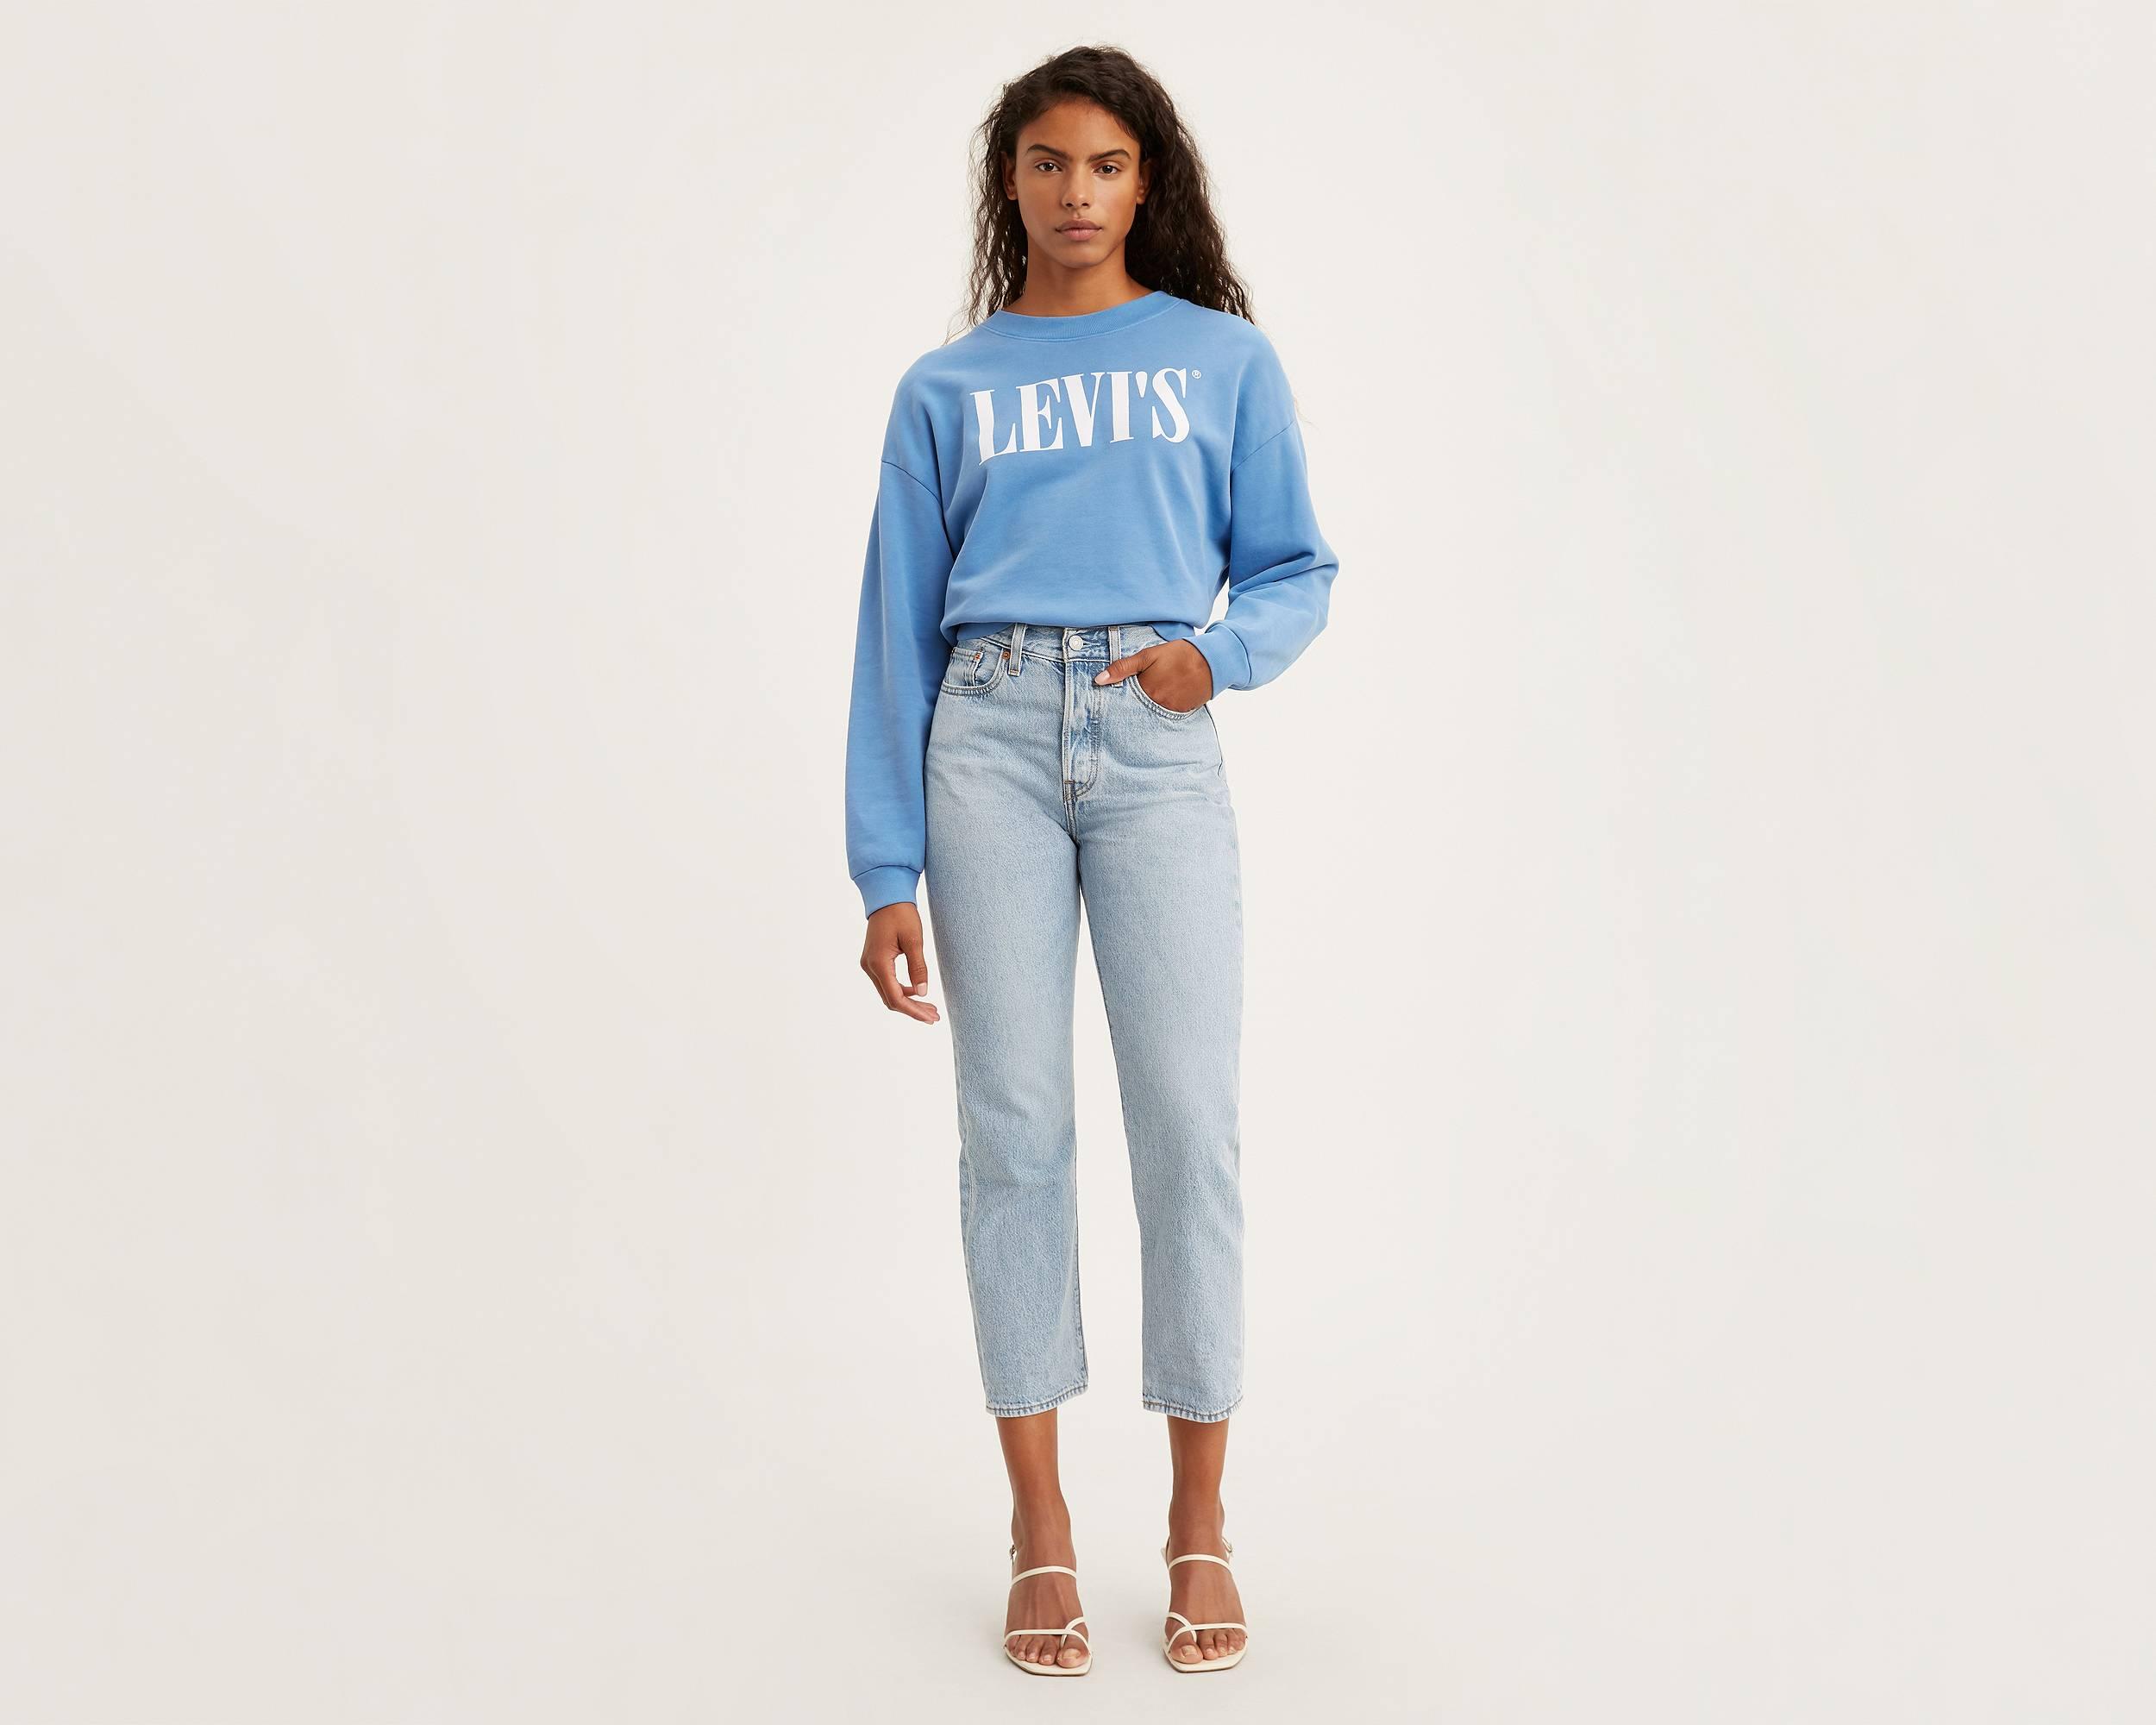 Wedgie Straight Jeans - Levi's Jeans, Jackets & Clothing